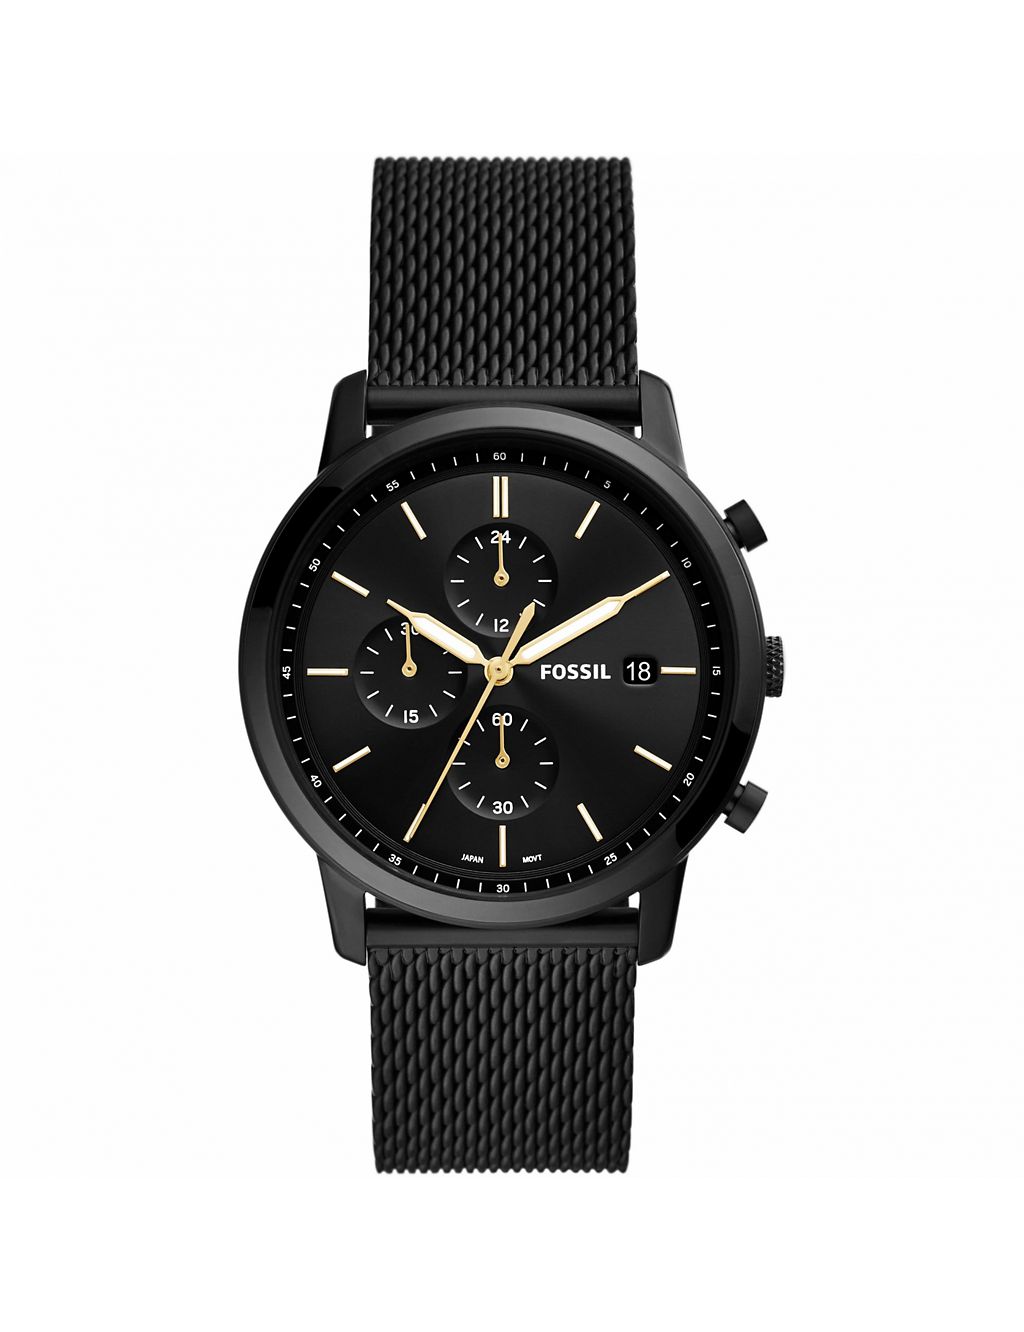 Fossil Minimalist Black Stainless Steel Watch 3 of 8